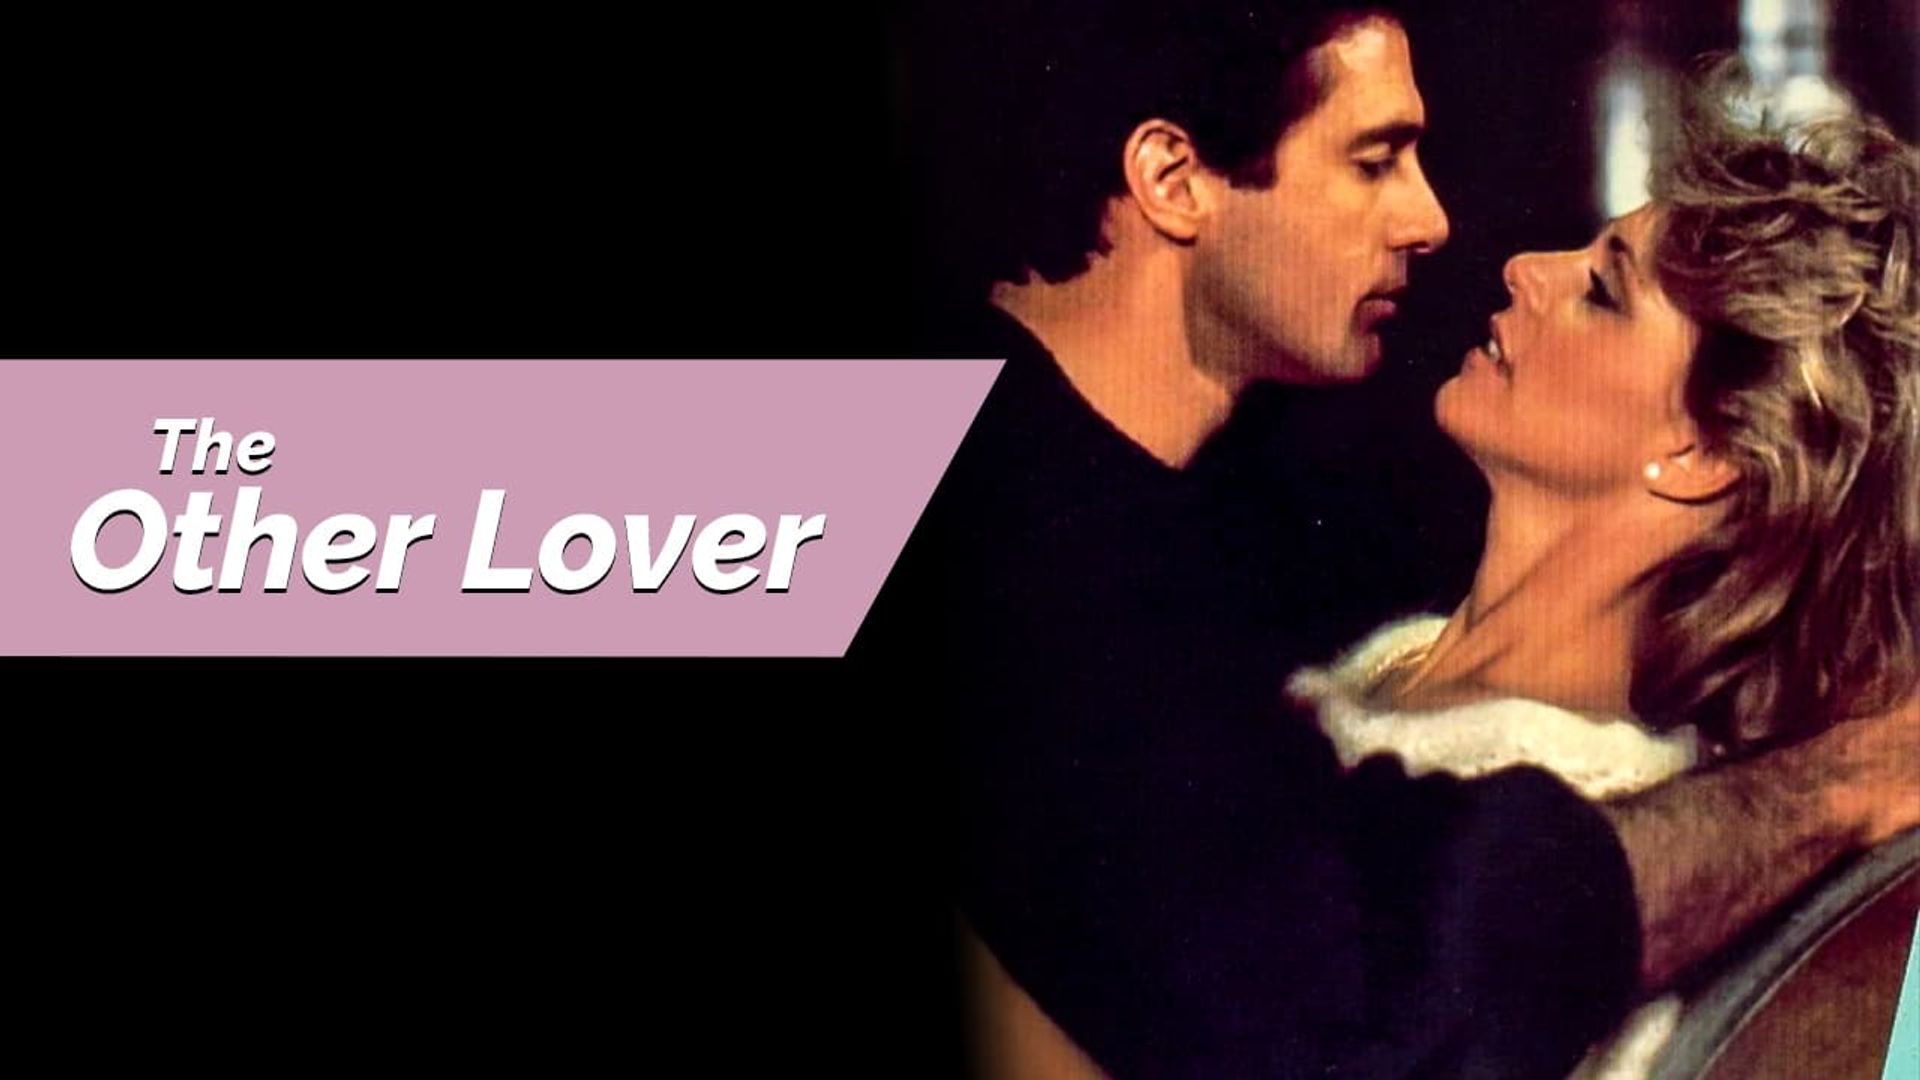 The Other Lover background